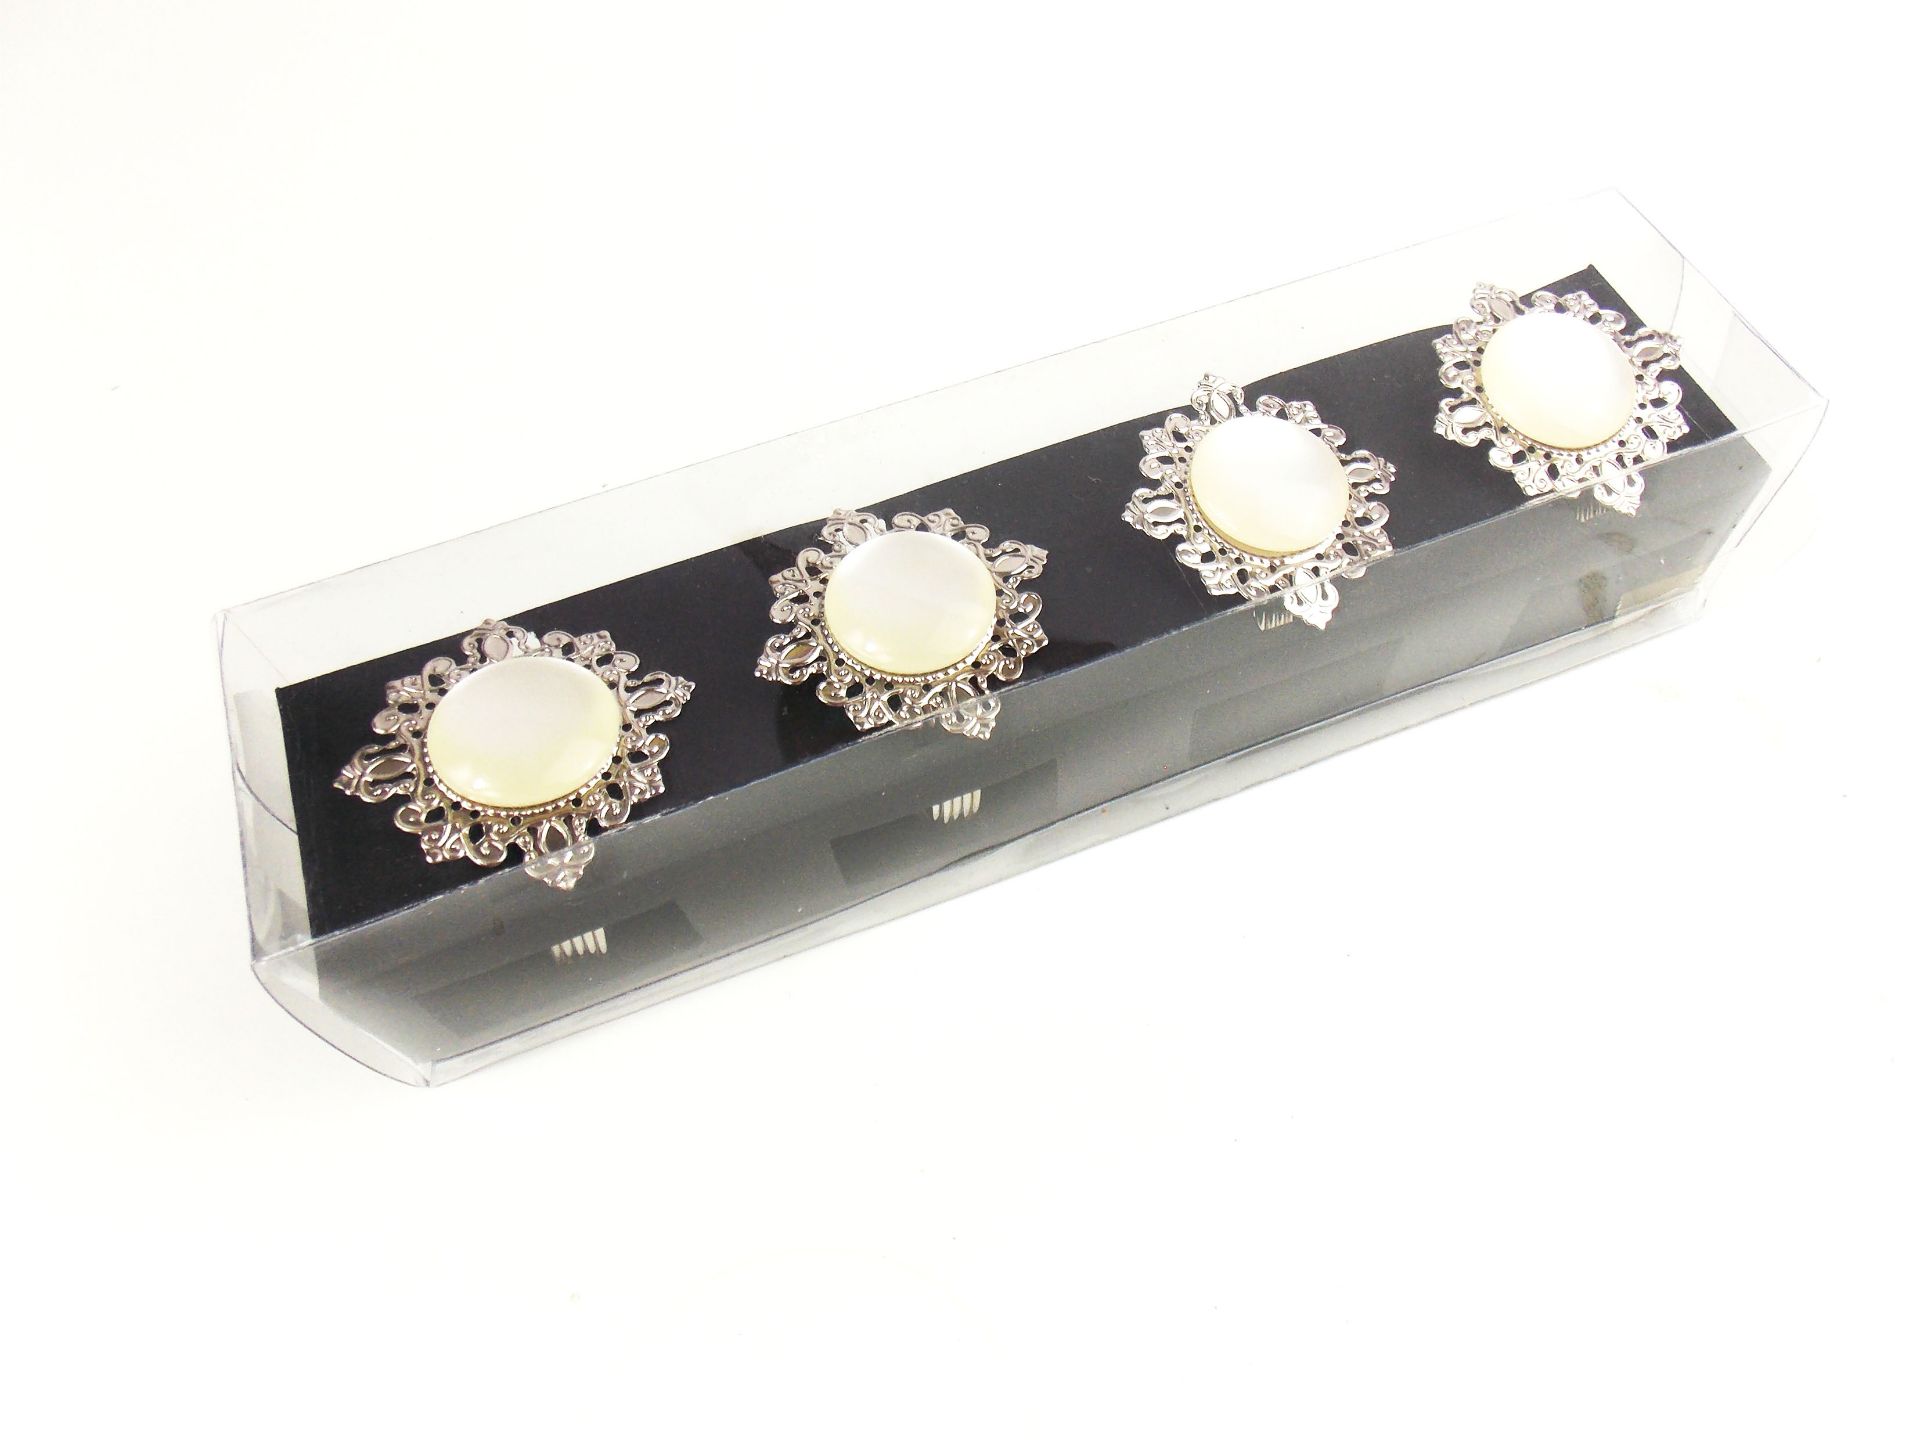 6 x Boxes of Four Vintage Style Napkin Rings with Pearlized Crystal Cabochon Centres - Image 4 of 4